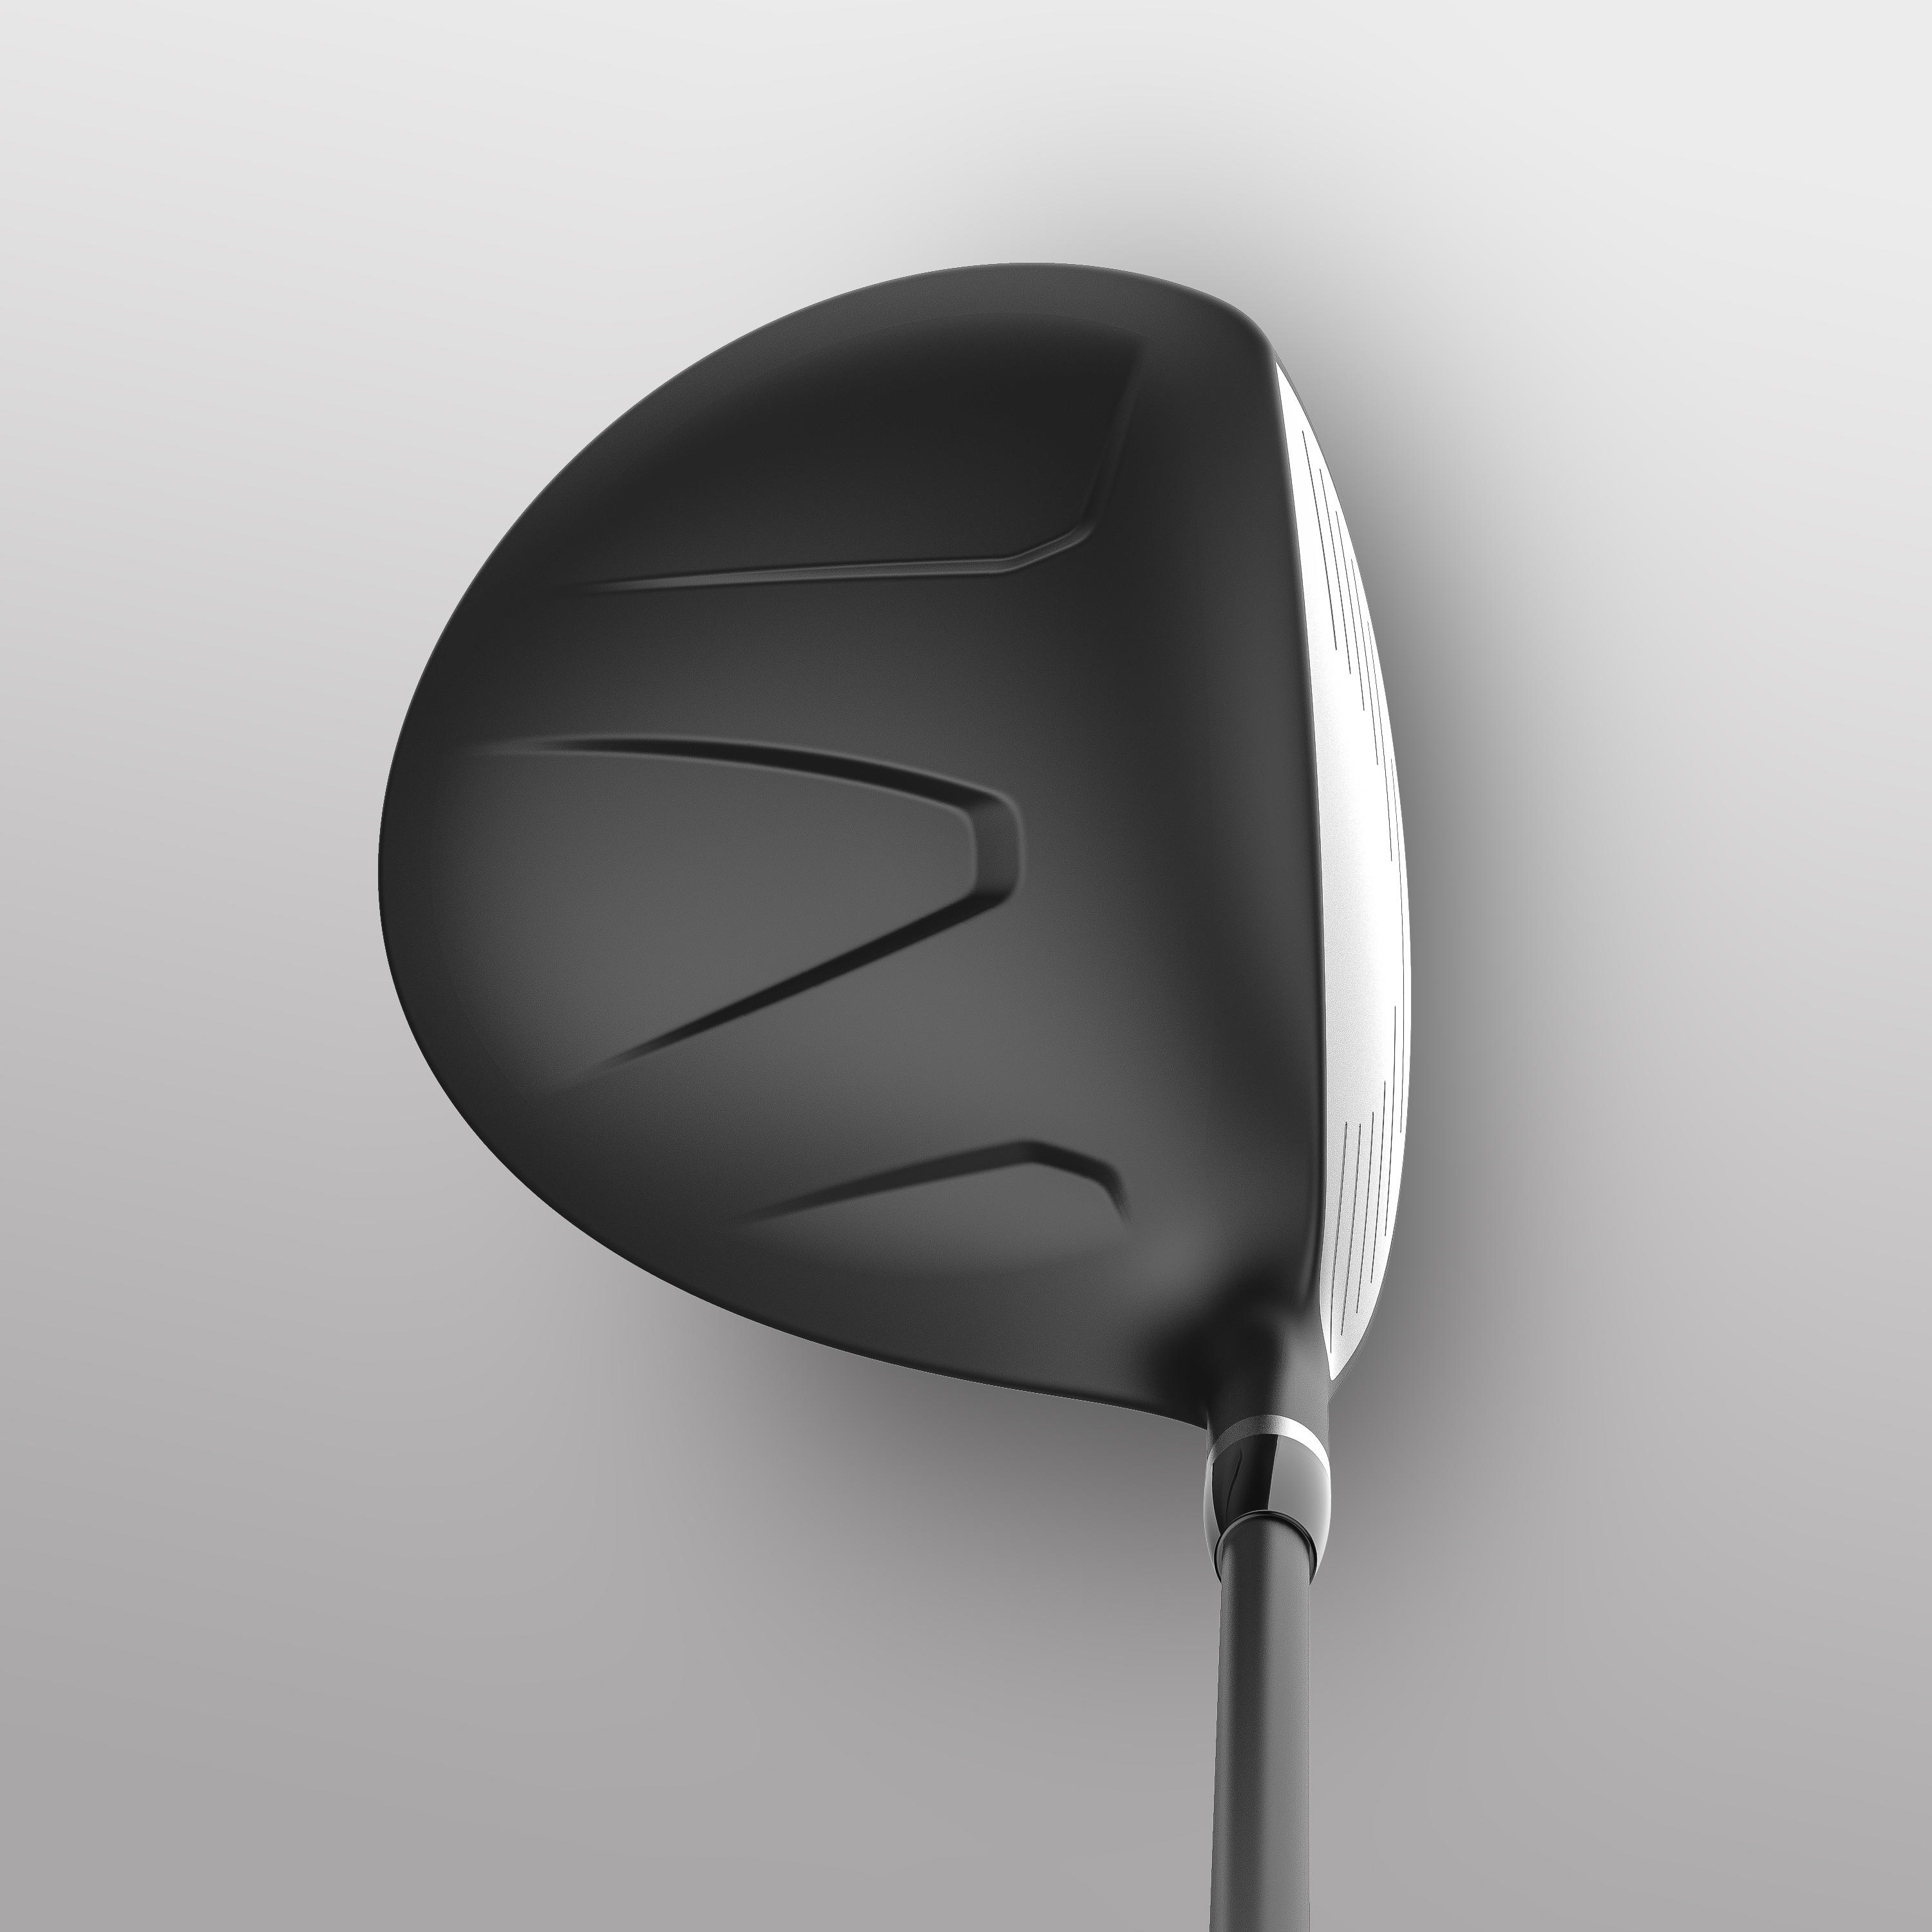 ADULT DRIVER LEFT HANDED GRAPHITE SIZE 1 - INESIS 100 2/12